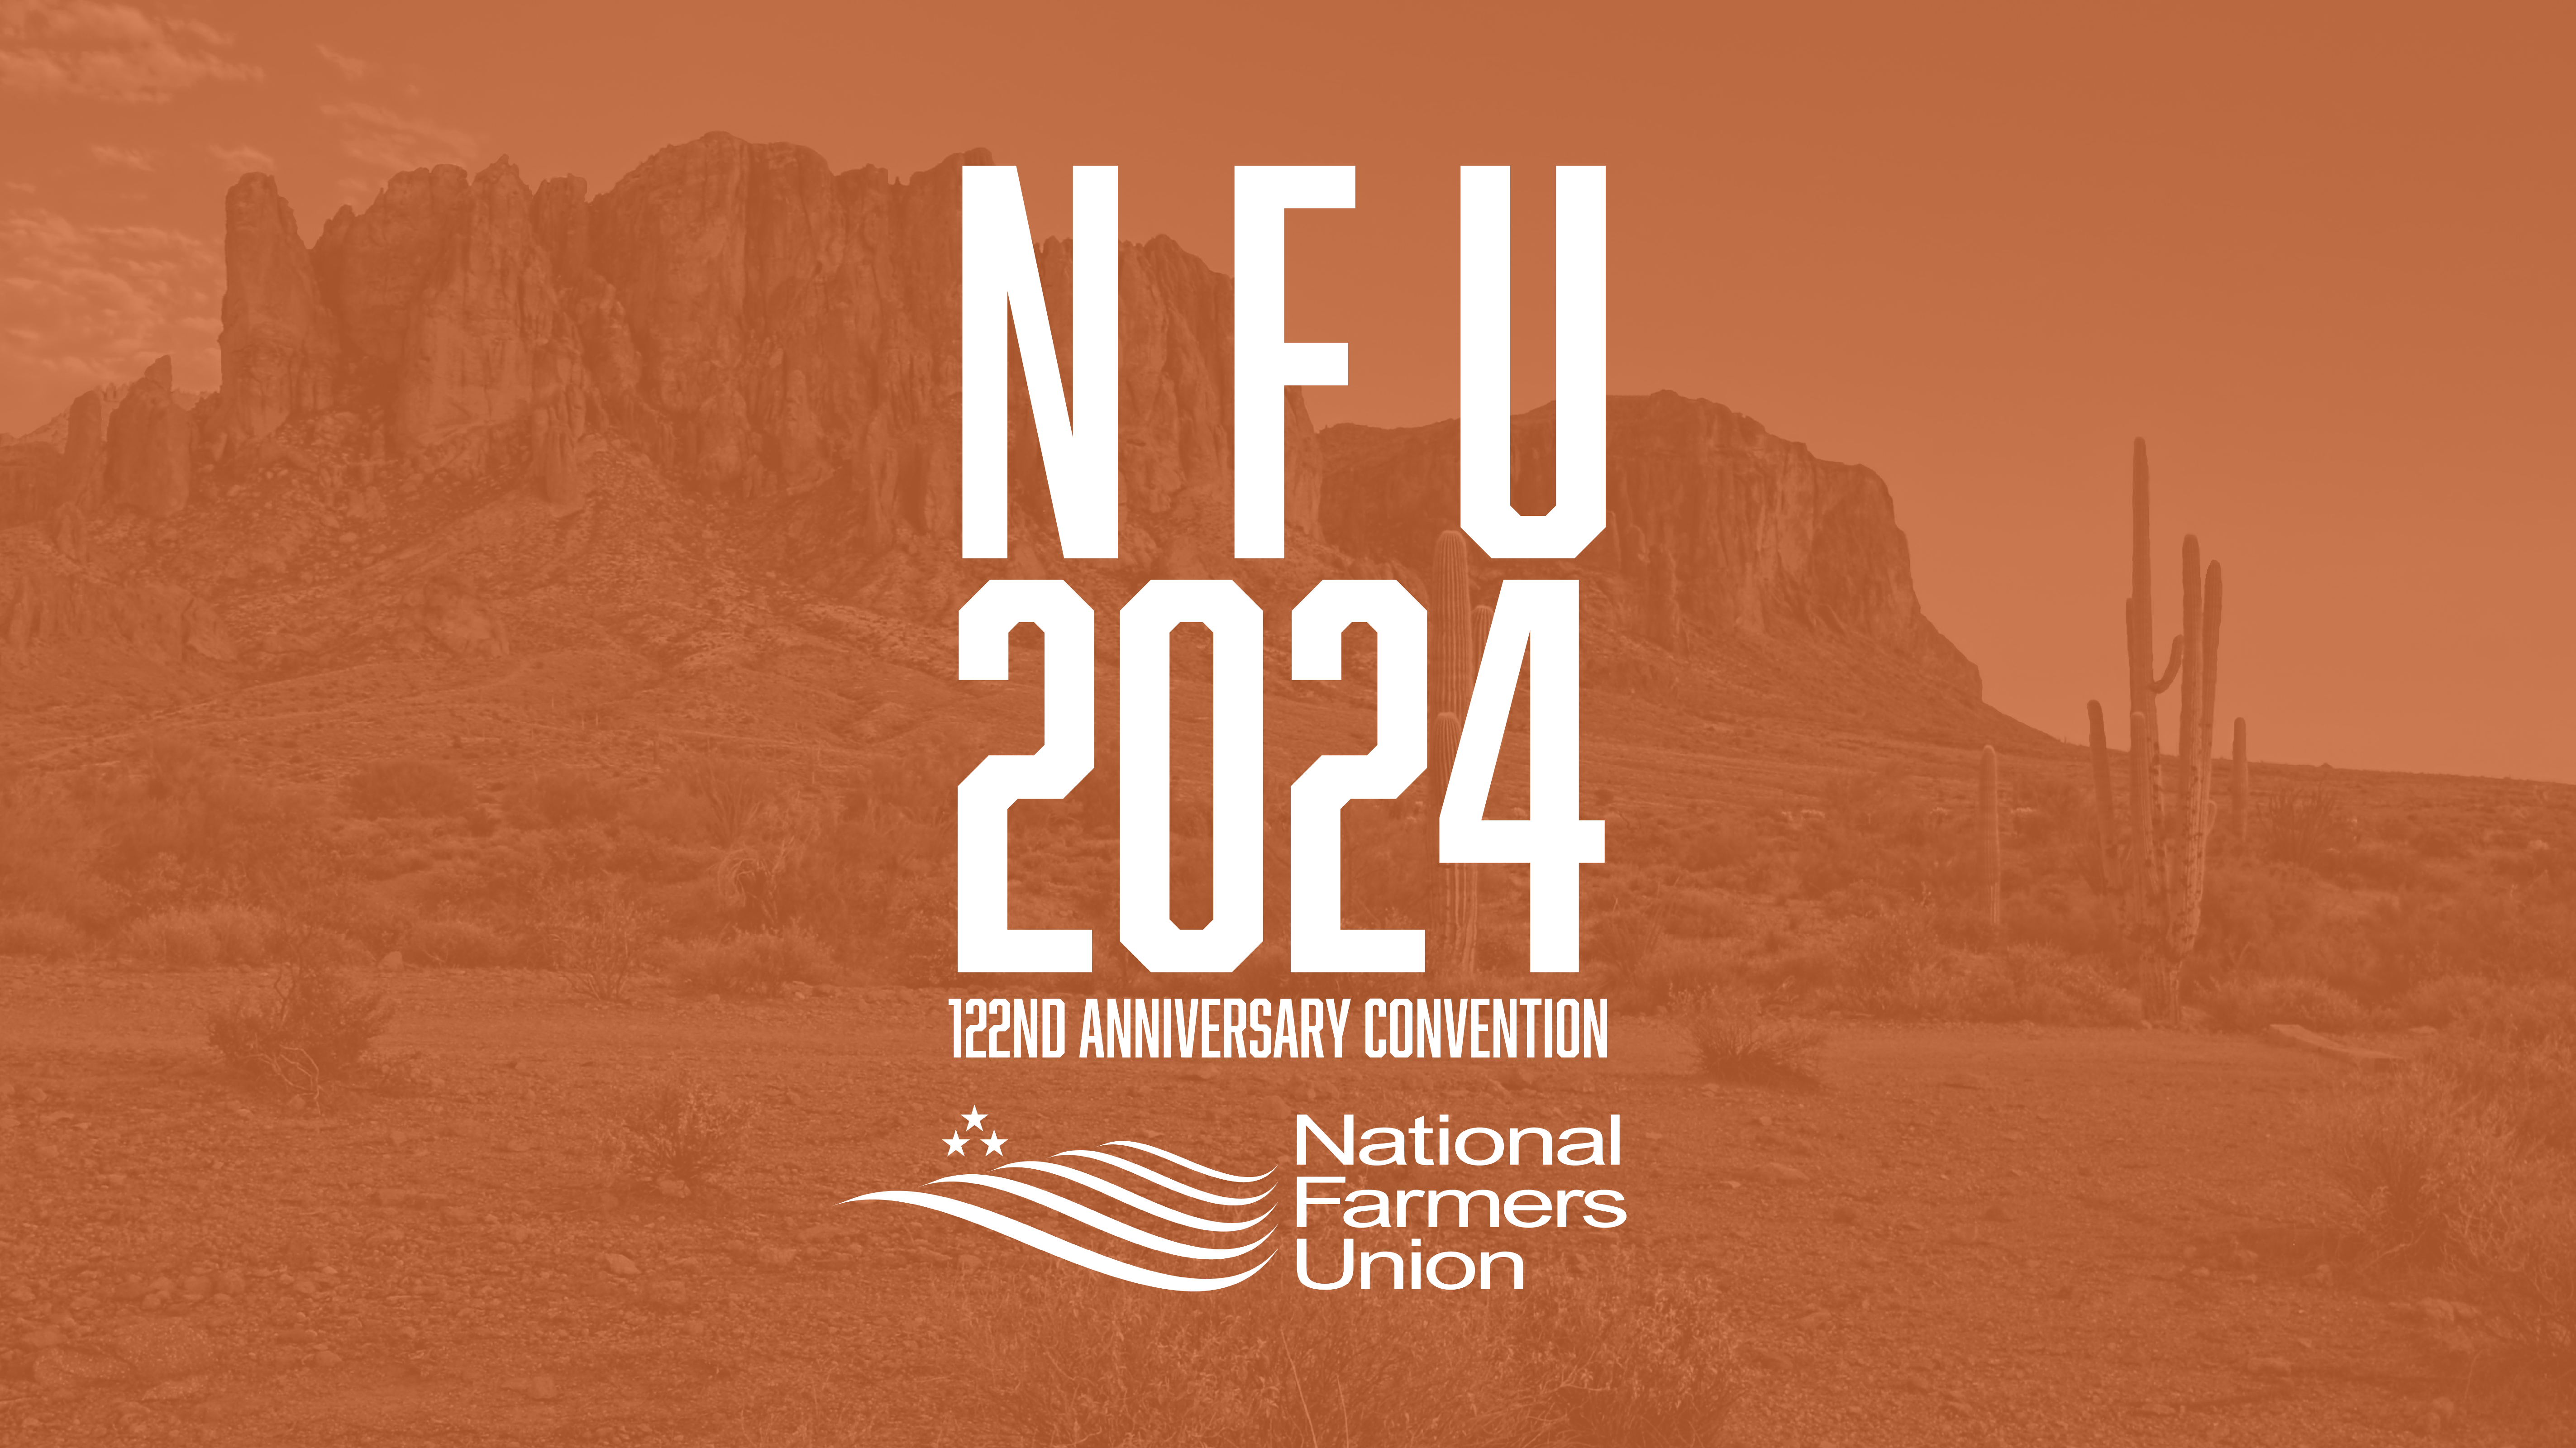 NFU Announces Featured Speakers and Events for 122nd Anniversary Convention in Scottsdale